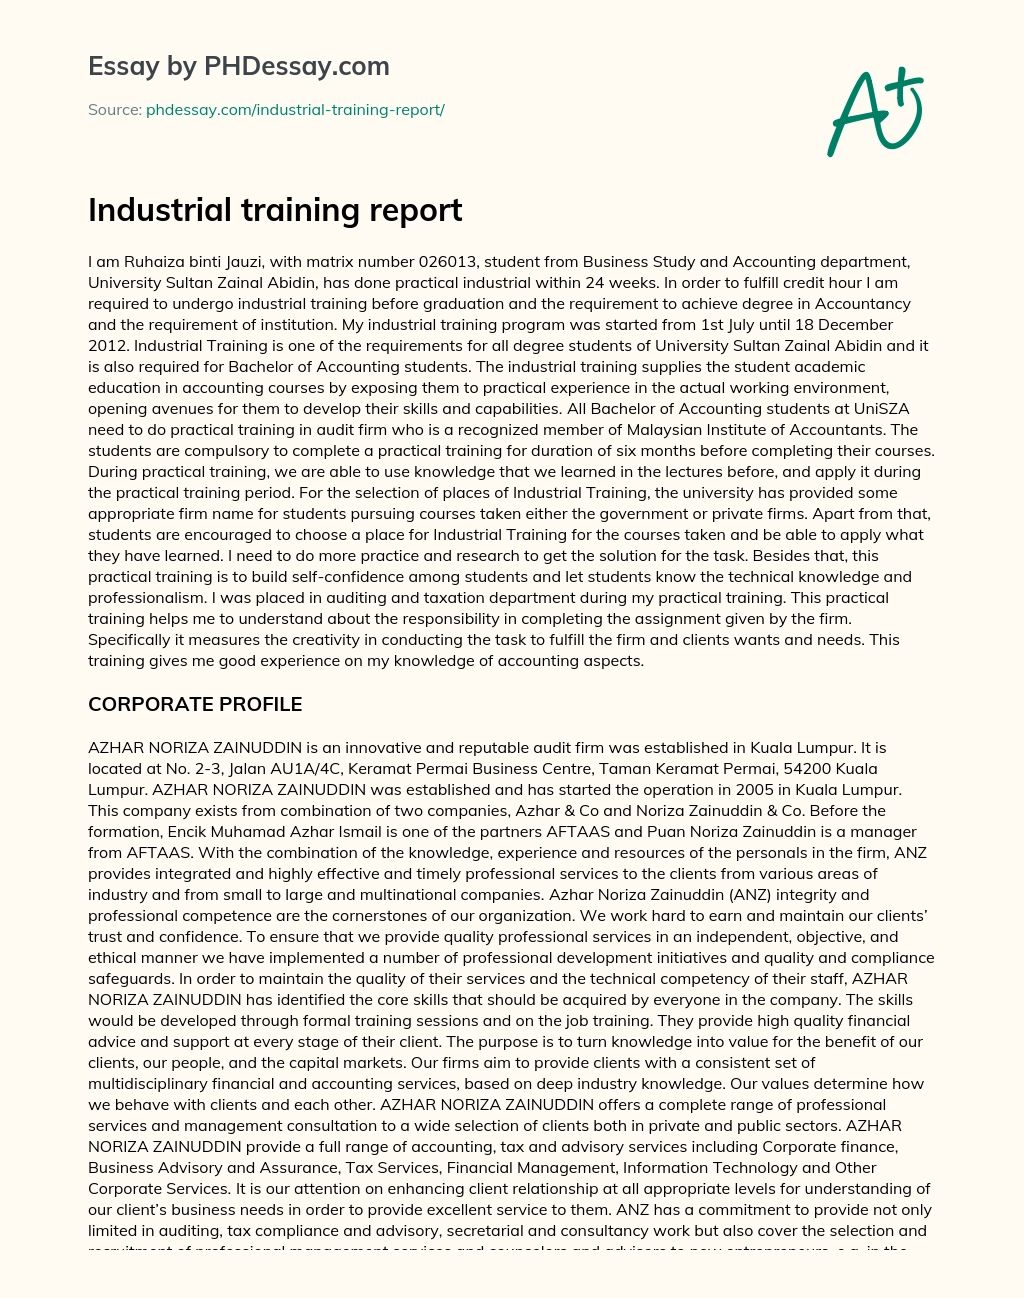 essay on my industrial training experience